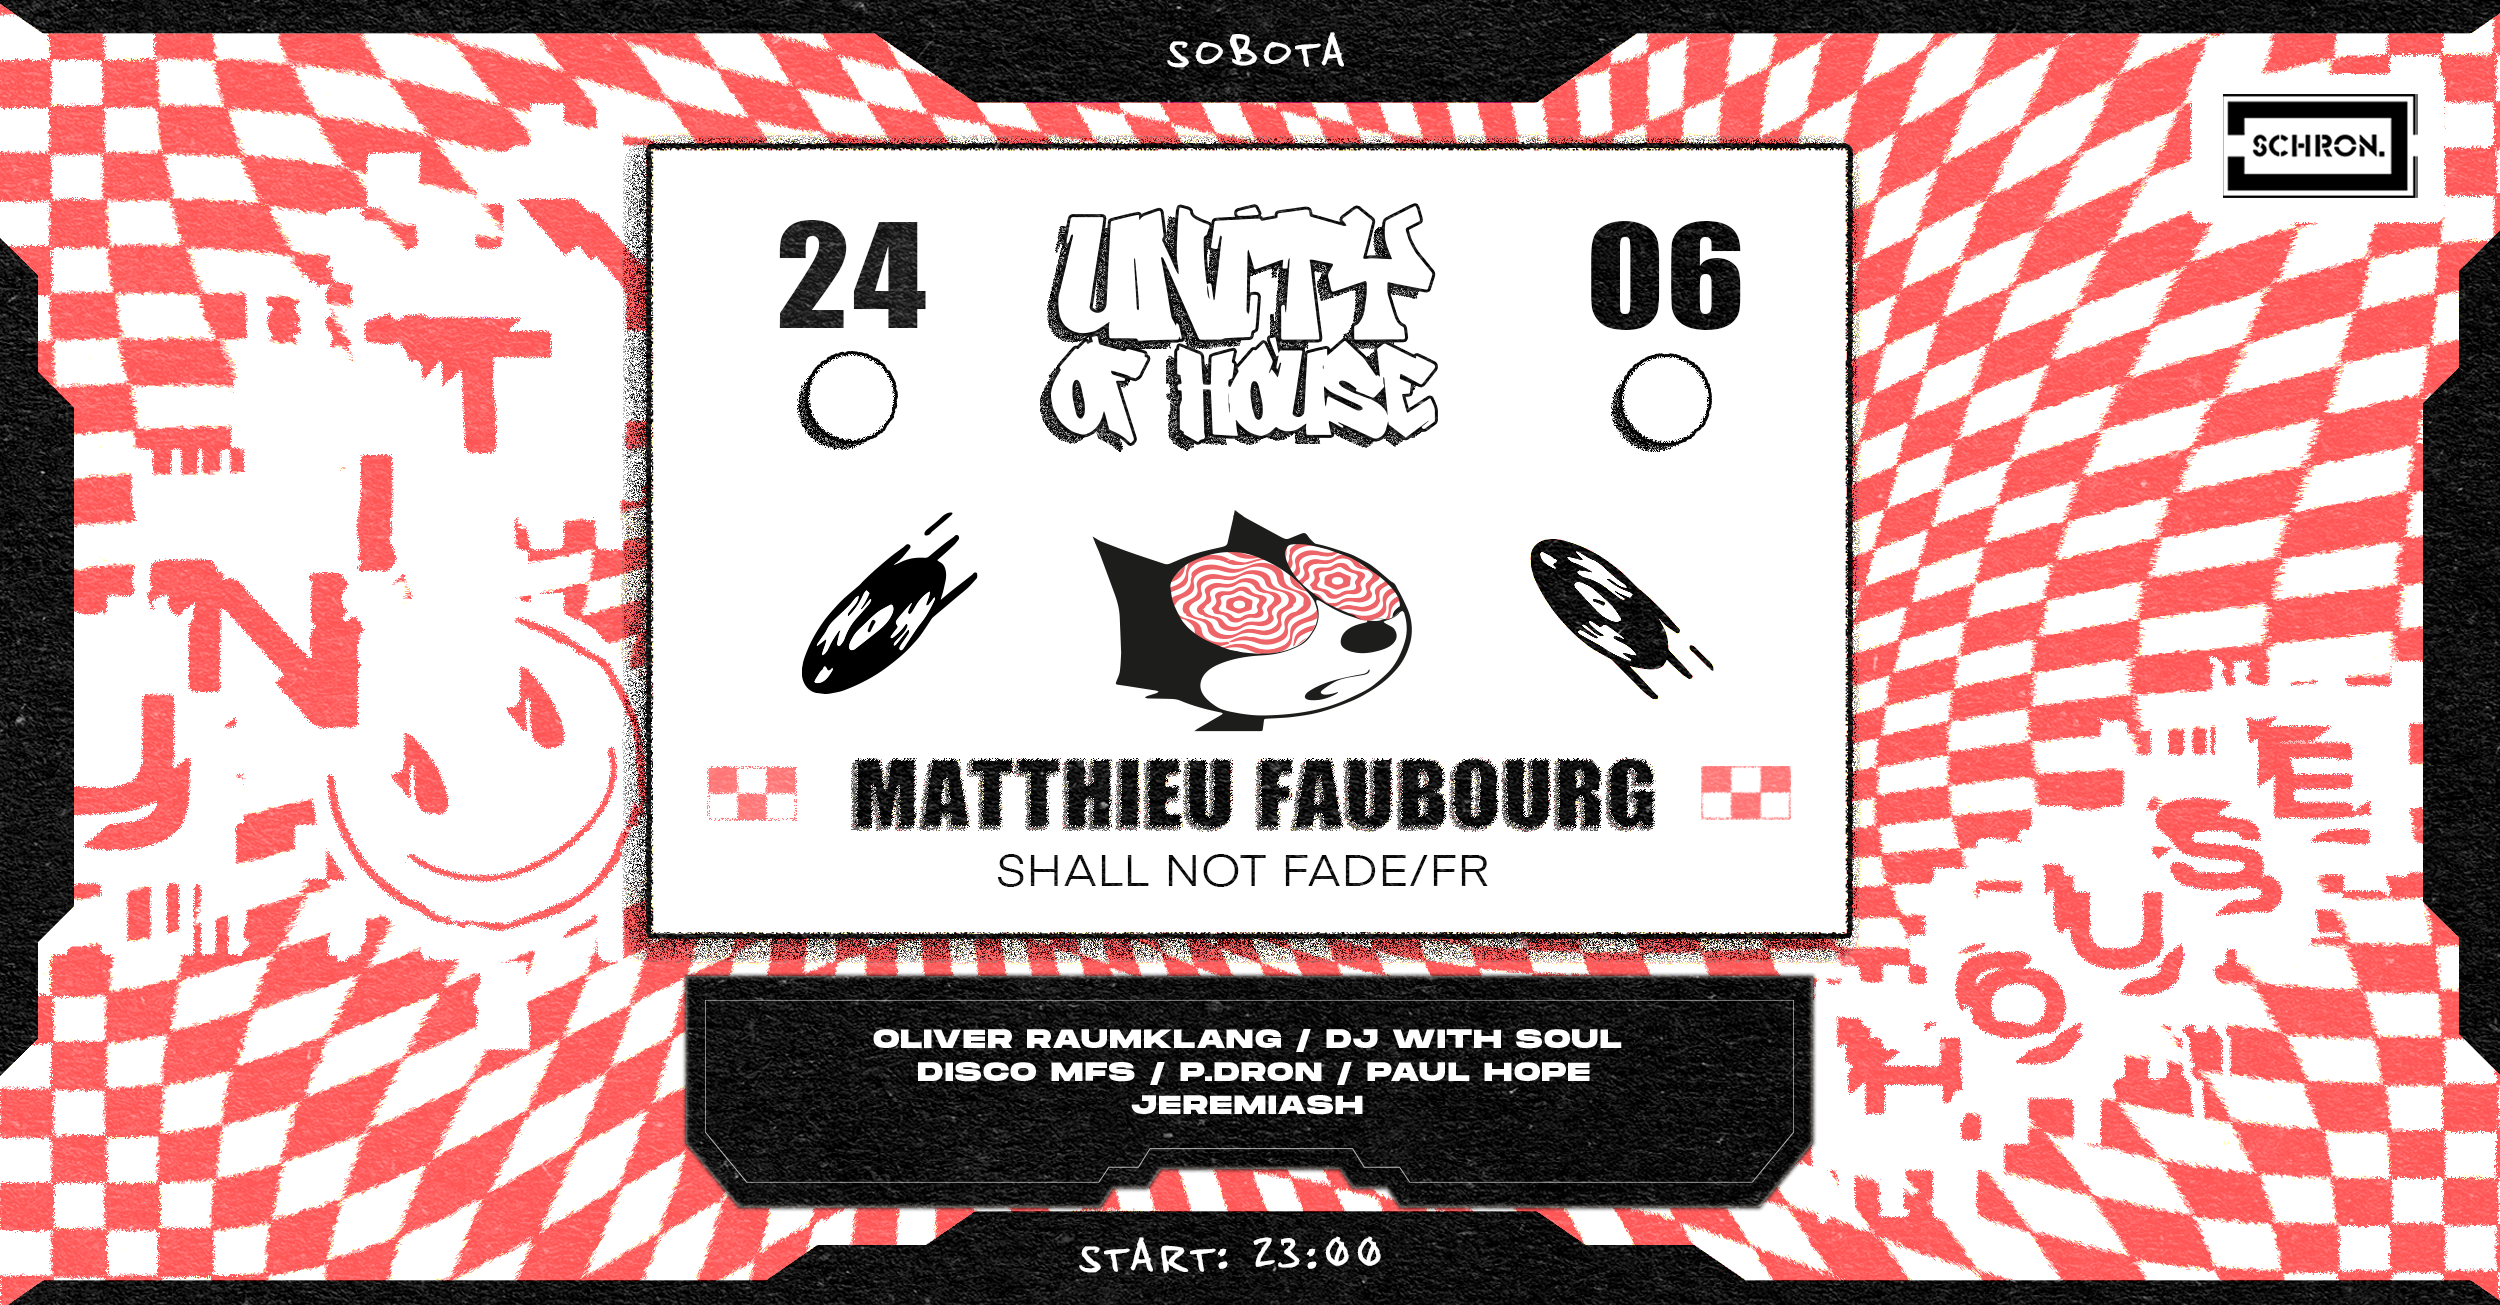 UNITY OF HOUSE with Matthieu Faubourg, Oliver Raumklang, DJ with Soul + more - Página frontal